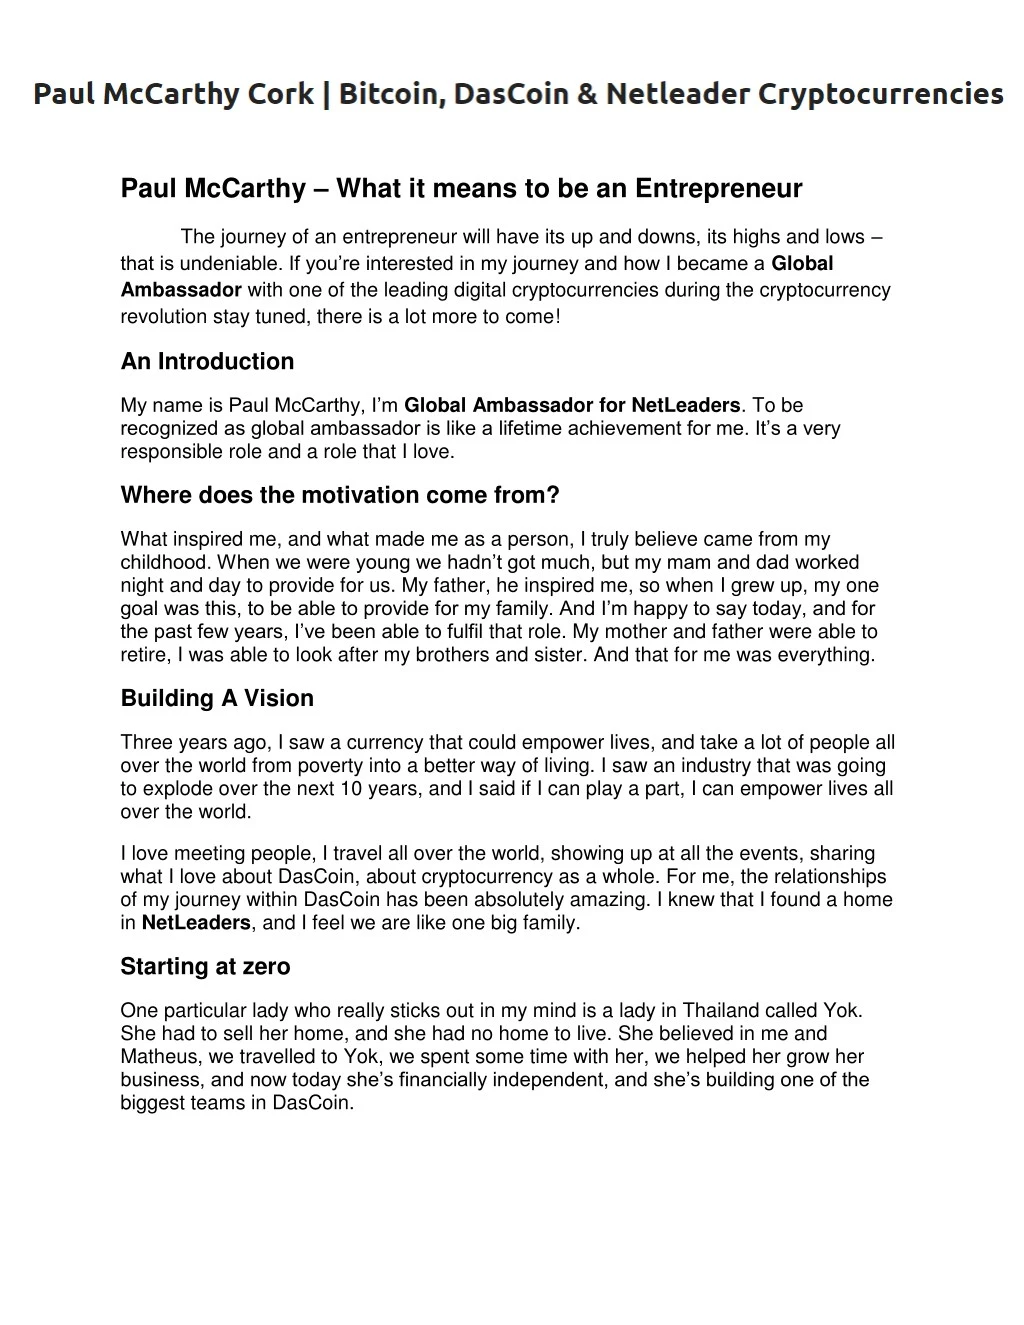 paul mccarthy what it means to be an entrepreneur